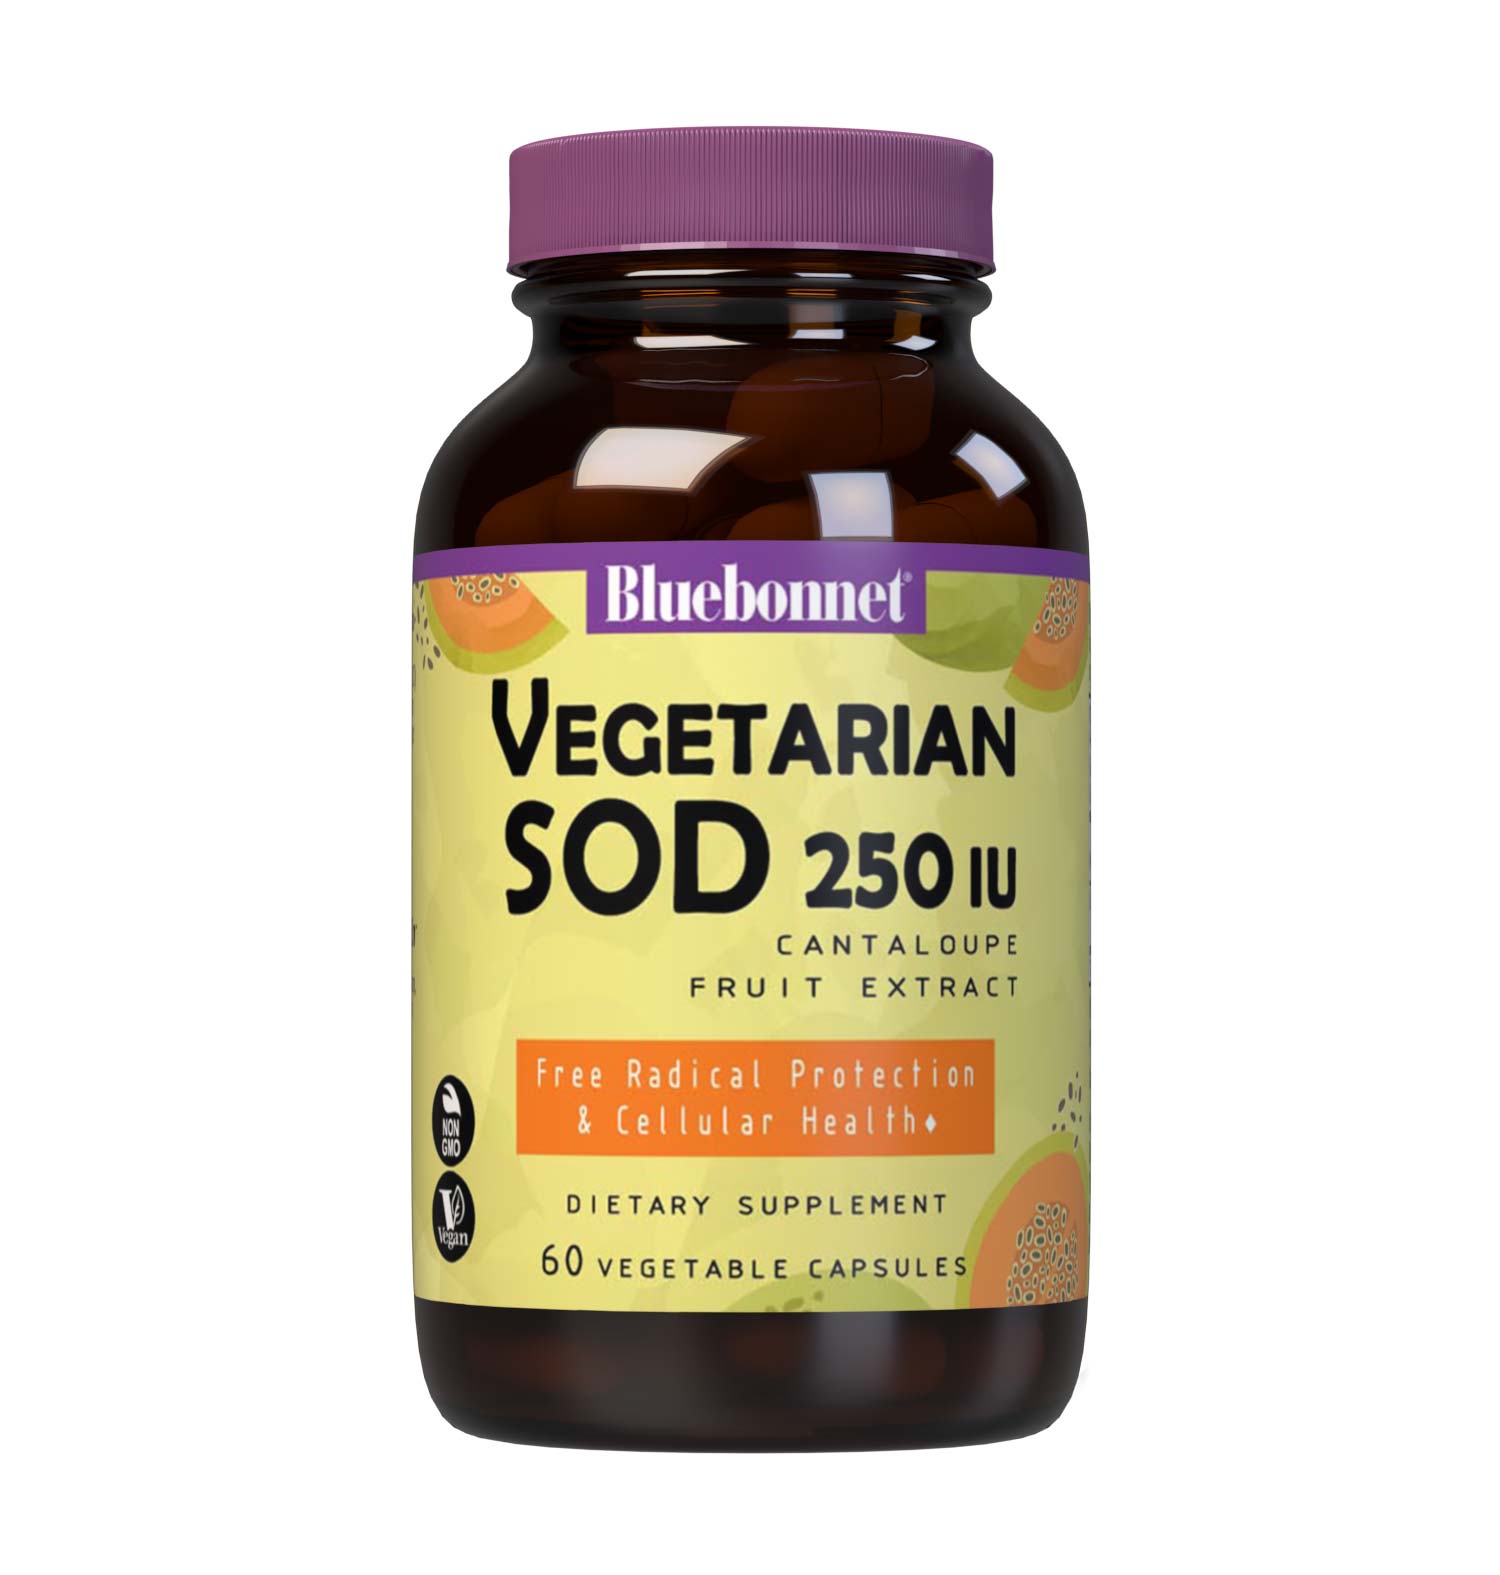 Bluebonnet’s Super Fruit Vegetarian SOD 250 IU Cantaloupe Melon Fruit Extract 60 Vegetable Capsules are formulated with the first orally effective, vegetarian form of superoxide dismutase (SOD) from cantaloupe melon in a gliadin complex. #size_60 count